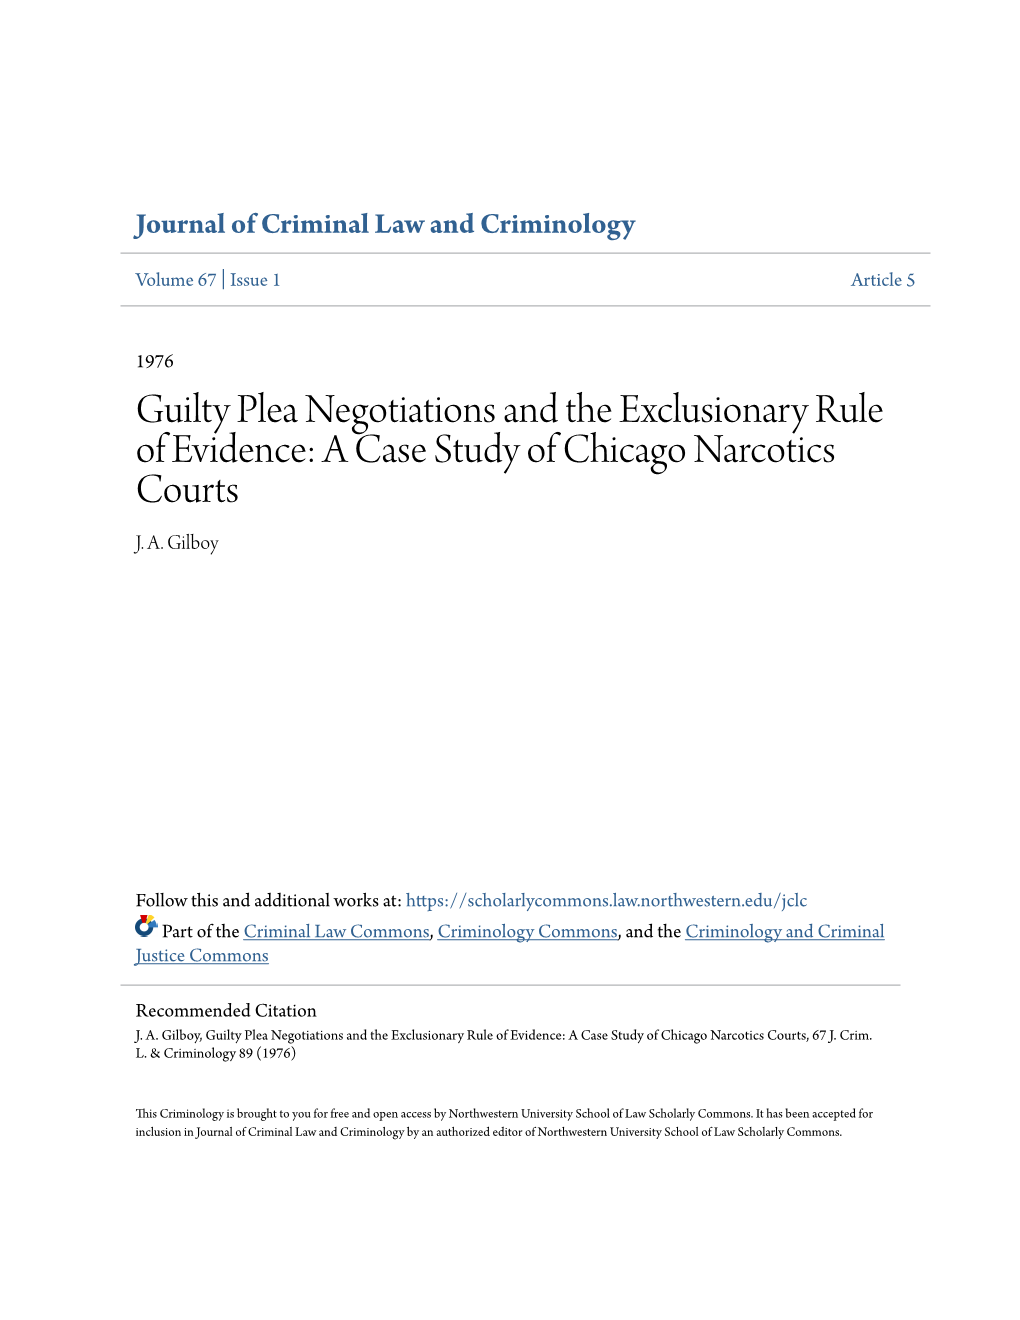 Guilty Plea Negotiations and the Exclusionary Rule of Evidence: a Case Study of Chicago Narcotics Courts J